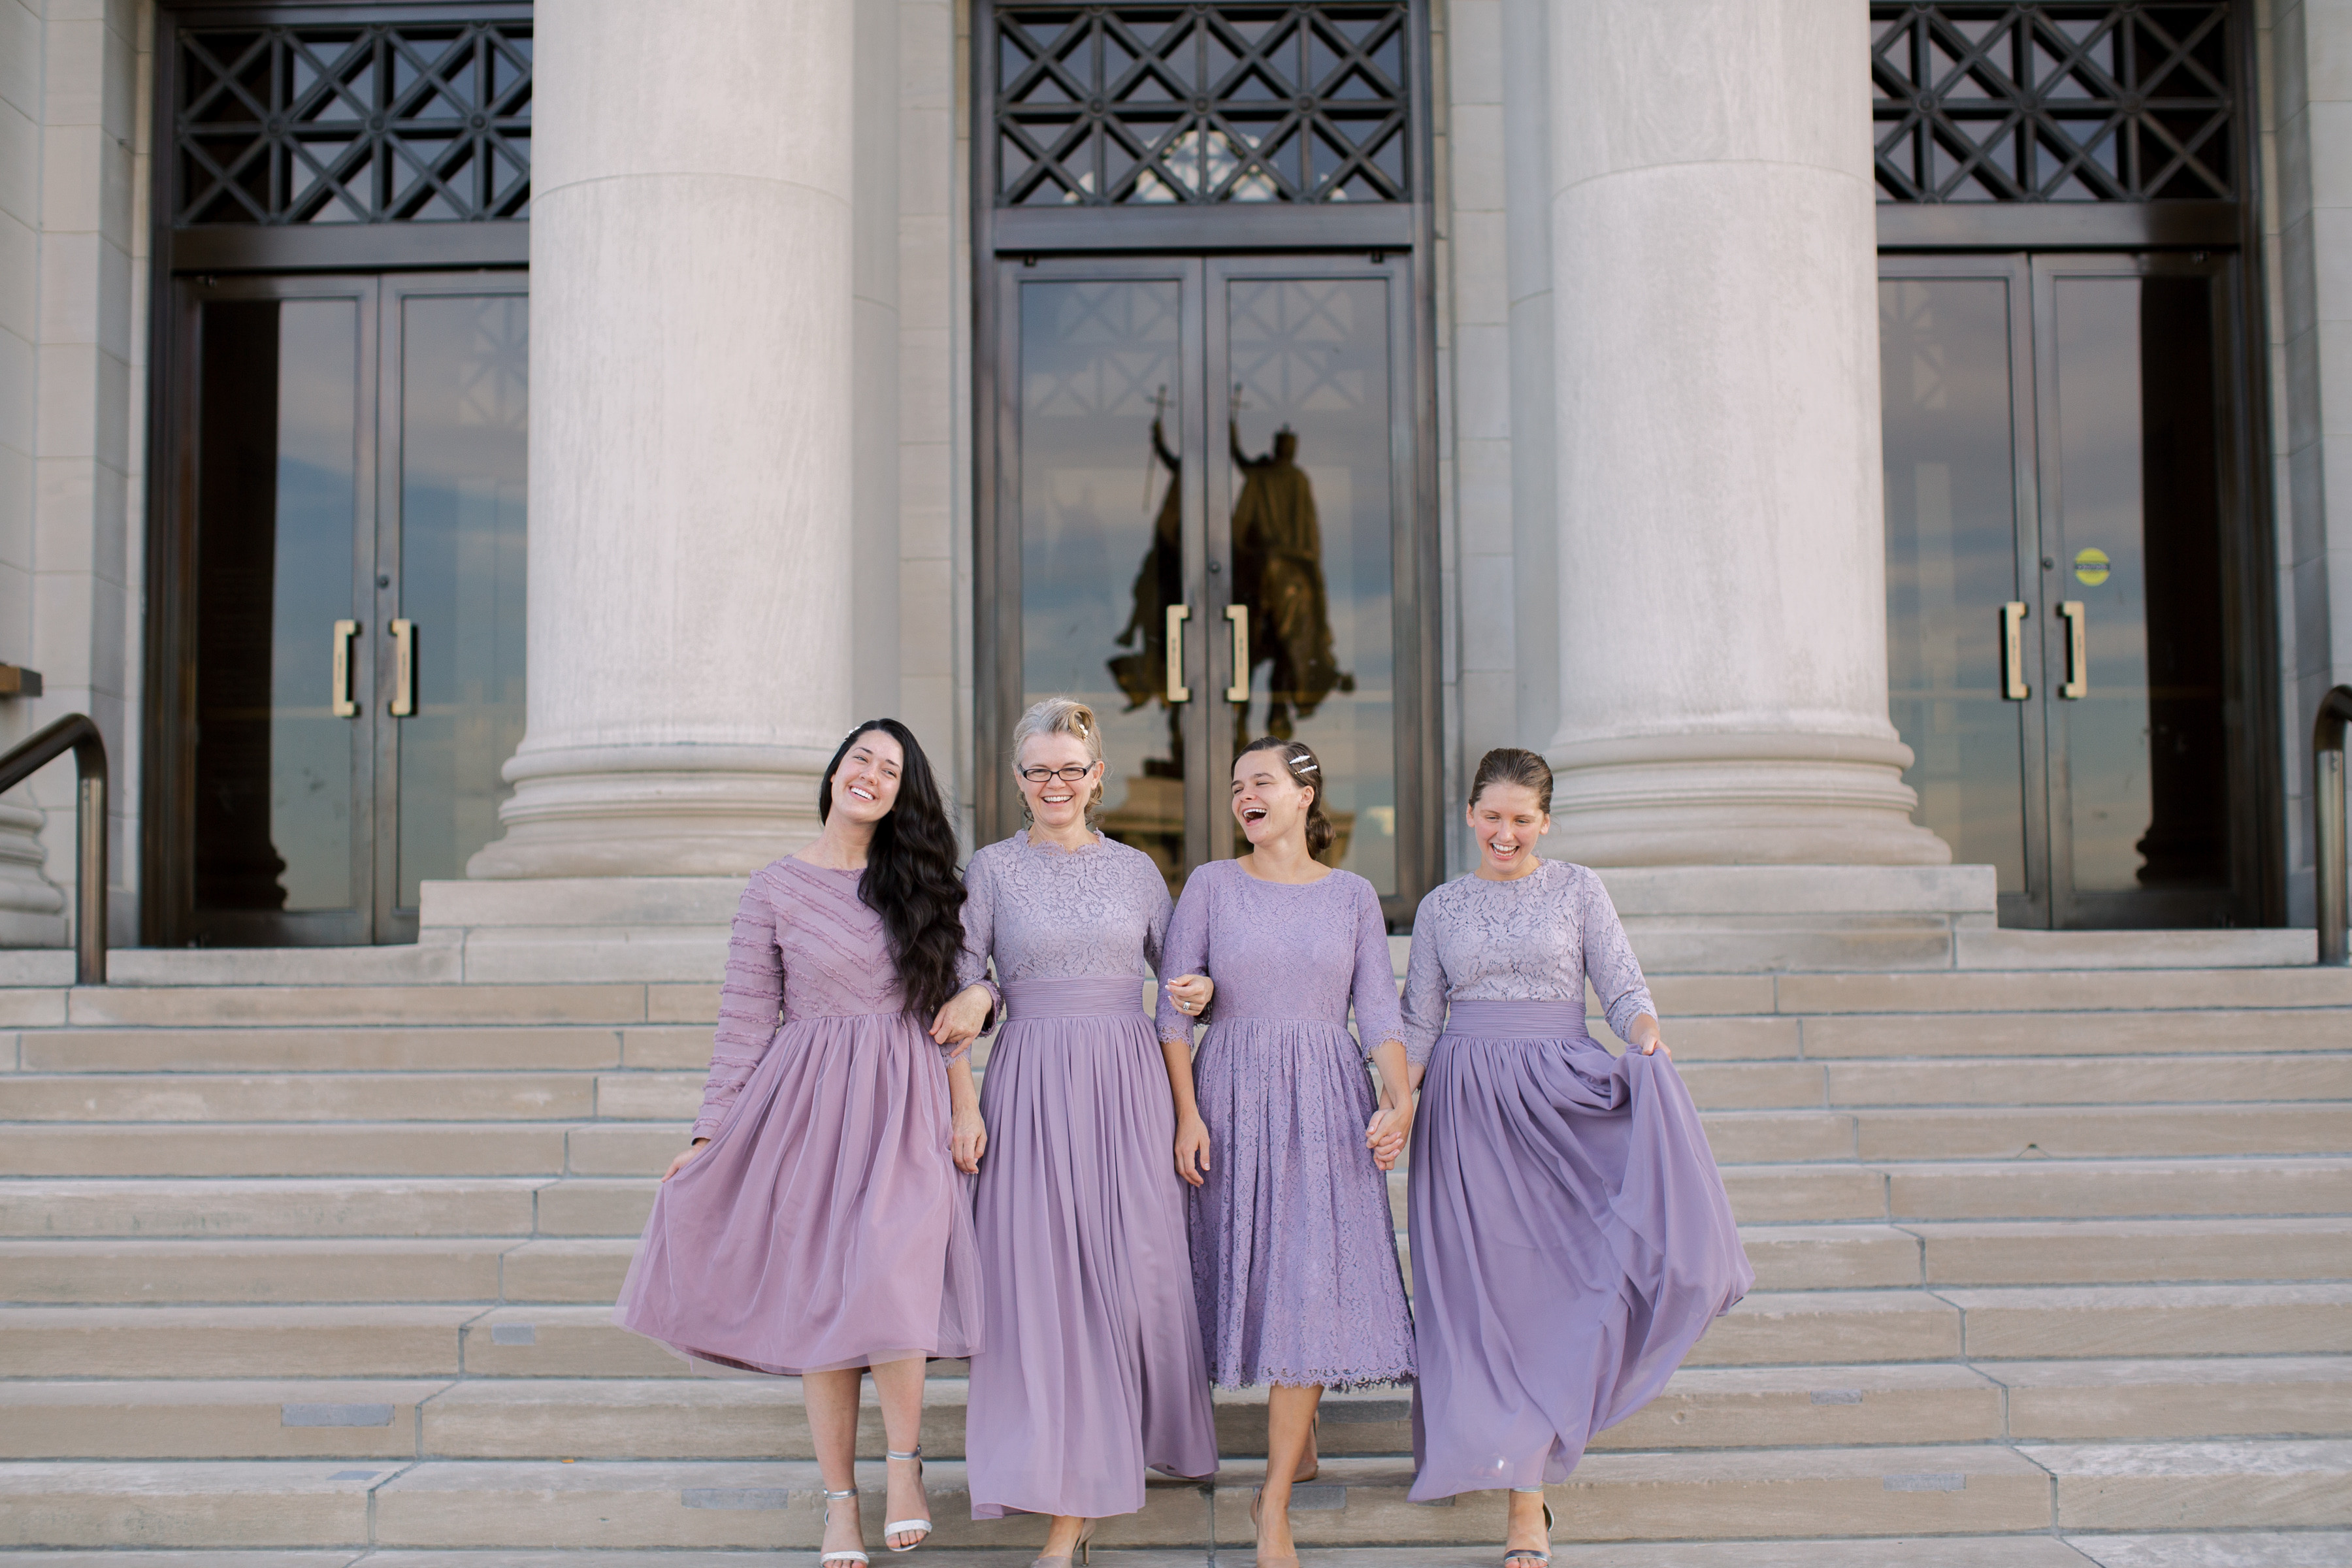 lilac dresses for weddings